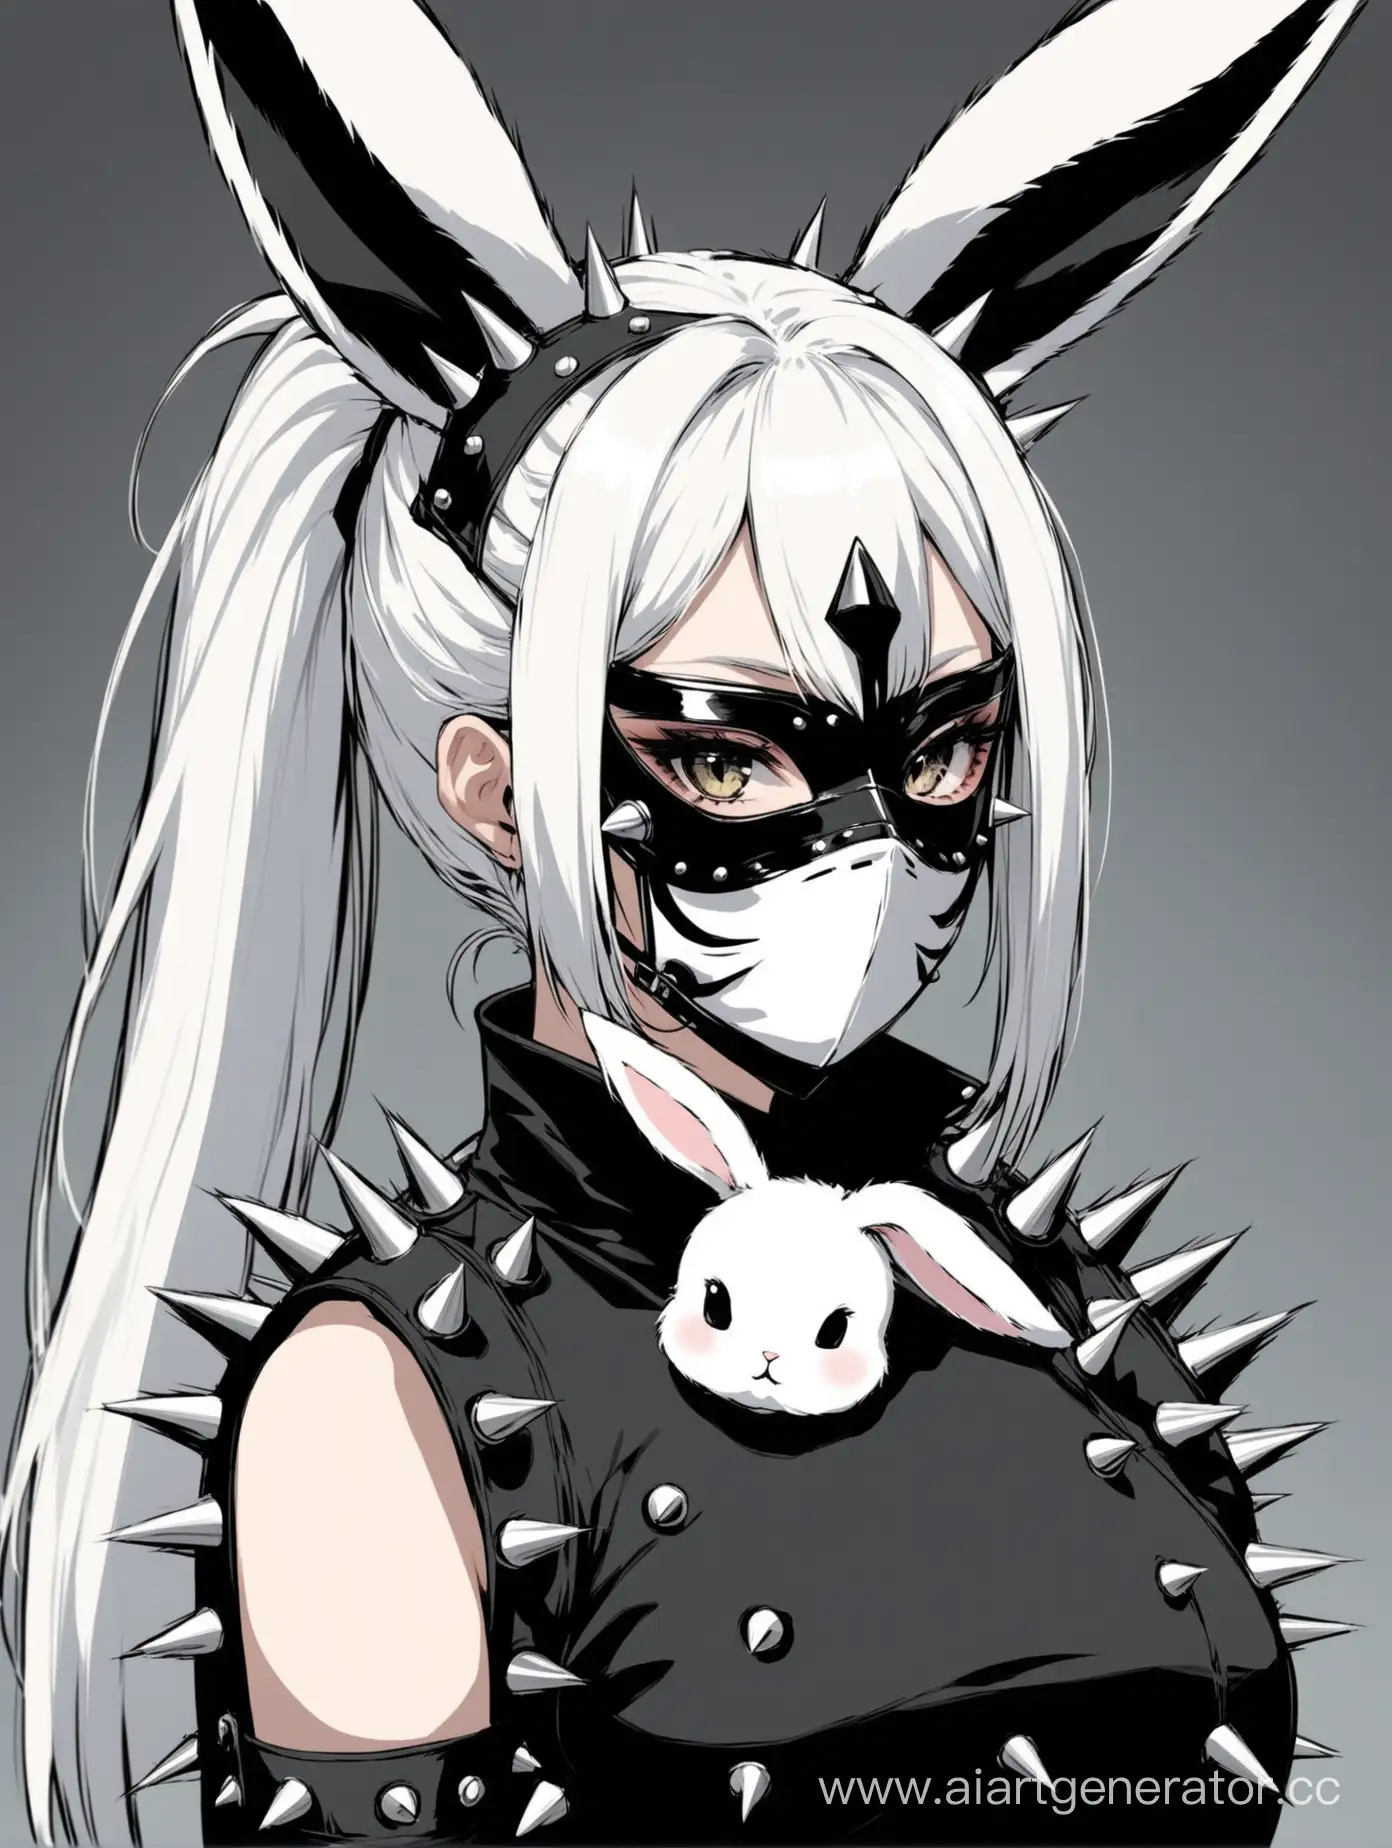 Sleek-WhiteHaired-Girl-in-Spiked-Mask-with-Black-and-White-Rabbit-Ears